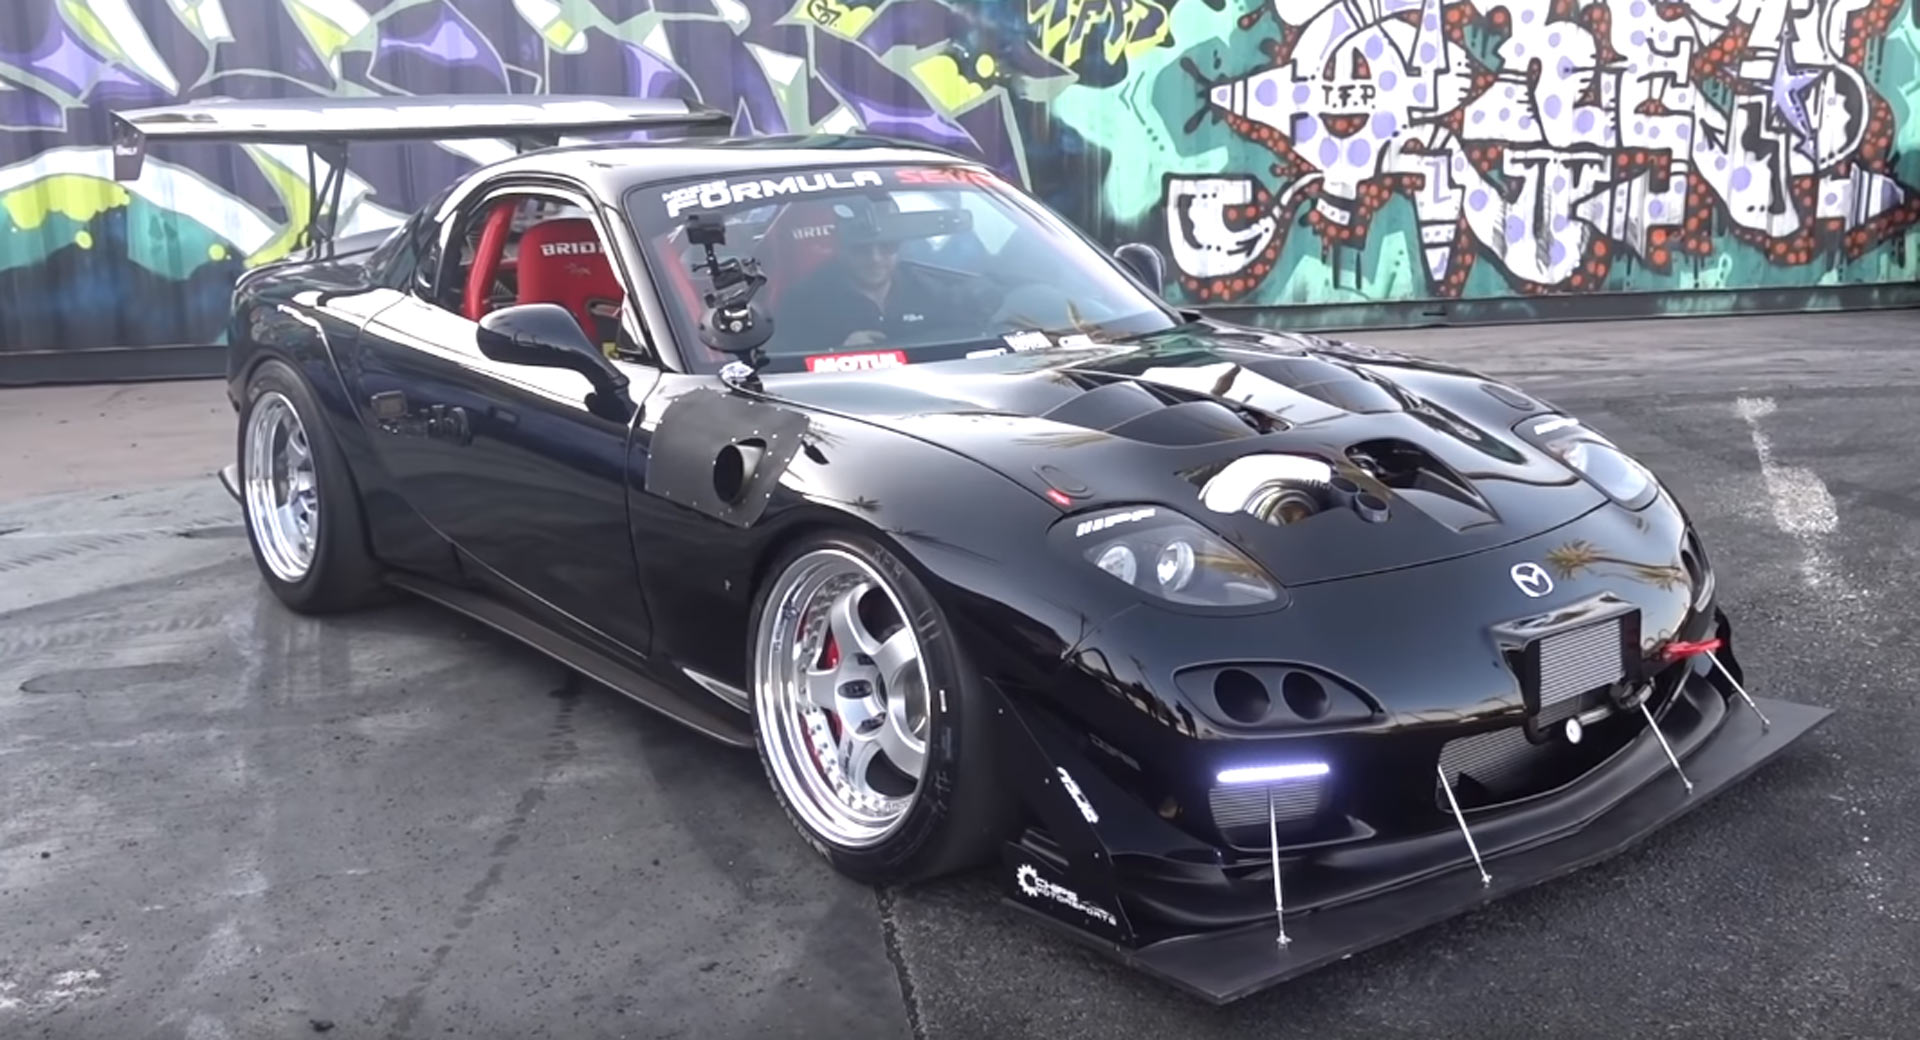 Turbo FourRotor Mazda RX7 Has 1,000 HP, Sounds Absolutely Insane